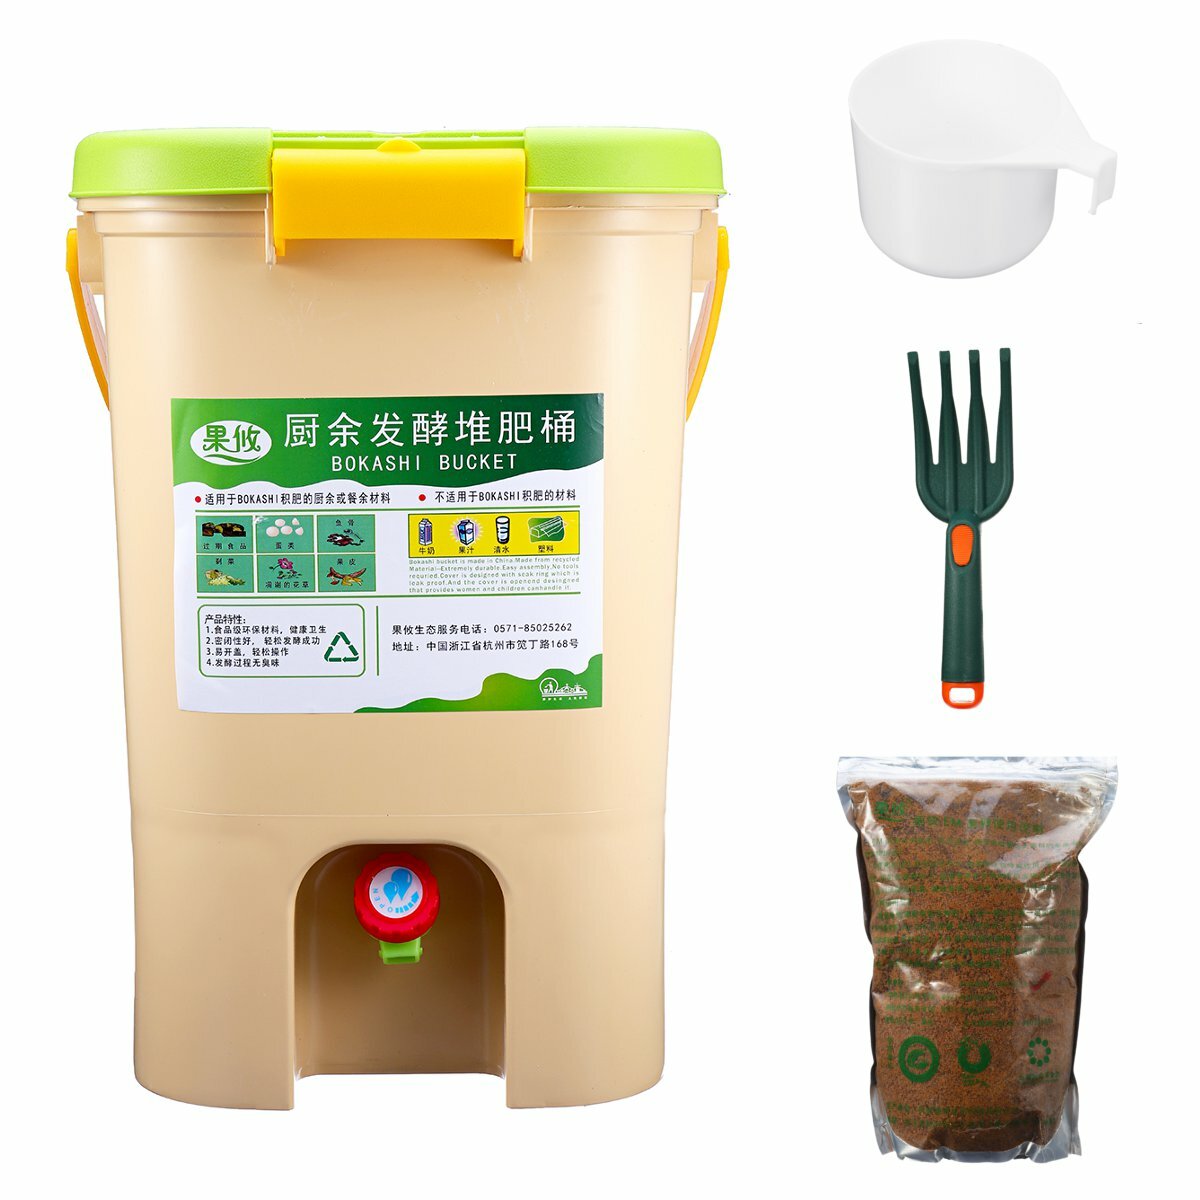 21L Kitchen Food Waste Recycle Composter Aerated Compost Waste Bins Bokashi Bucket